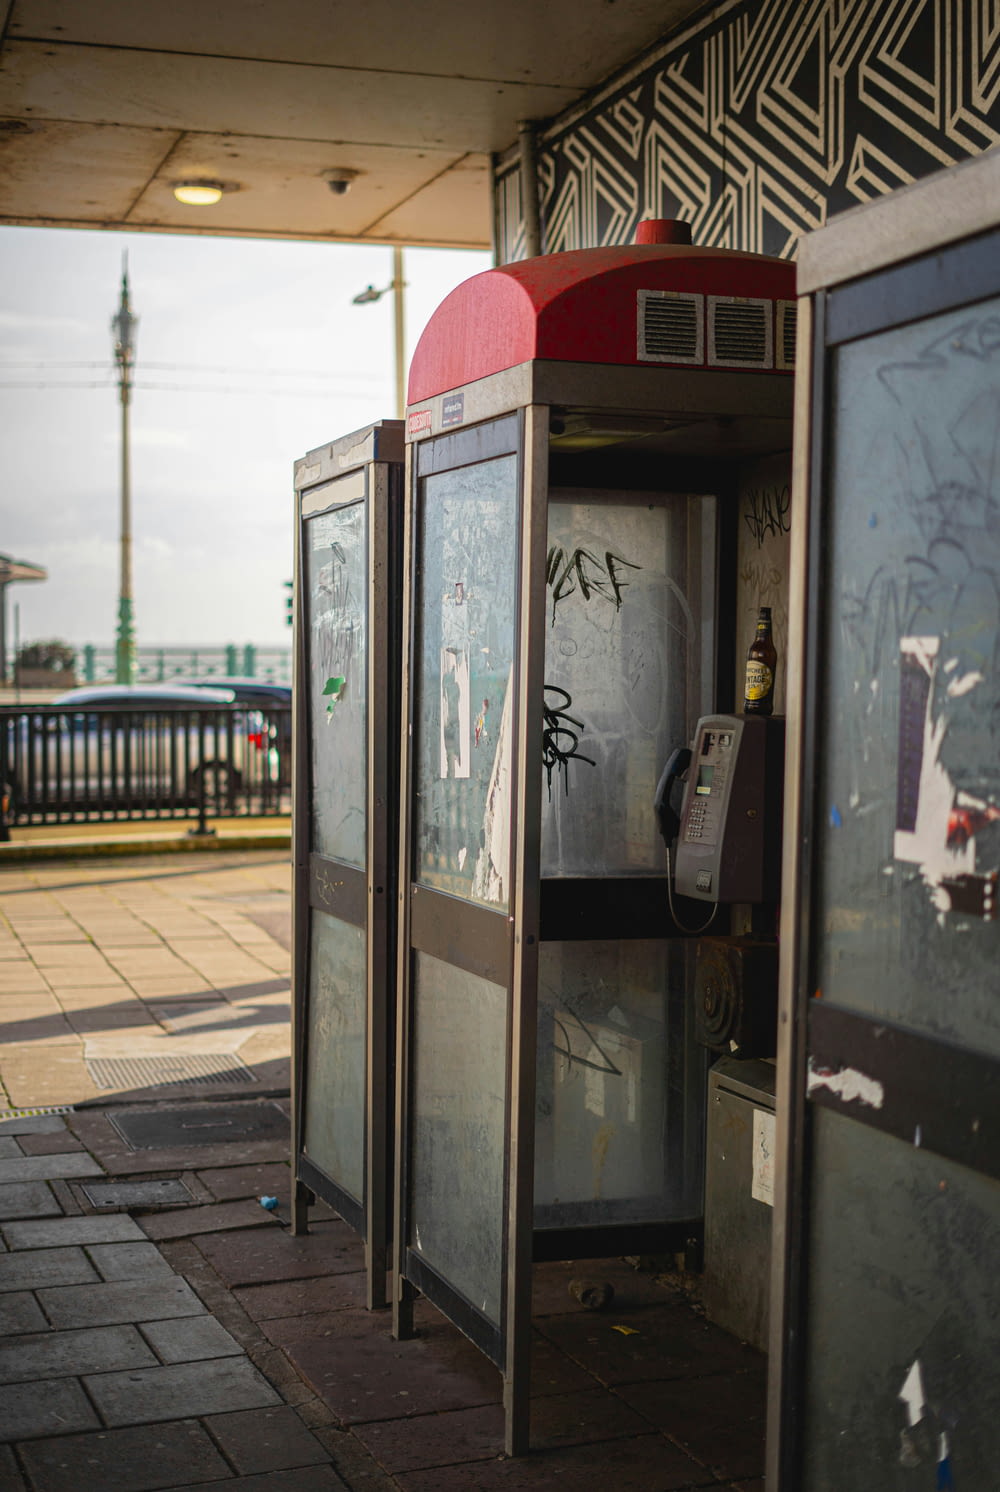 a public phone booth with graffiti on it